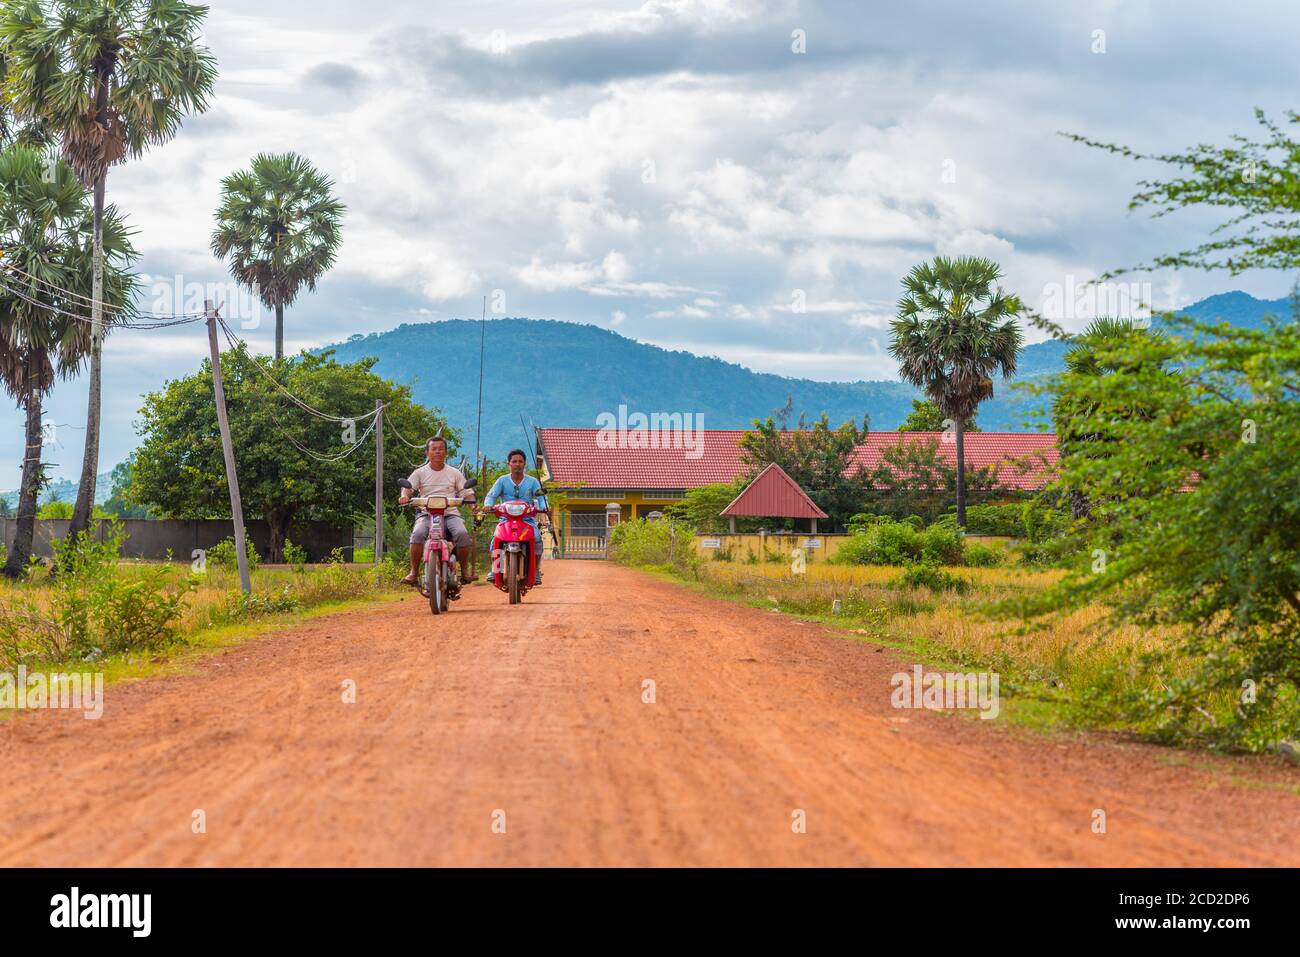 Cambodia rural scenery with two men who hold fishing rods drive motorbikes along dirt road with palmyra palm trees (Borassus flabellifer) on the side Stock Photo